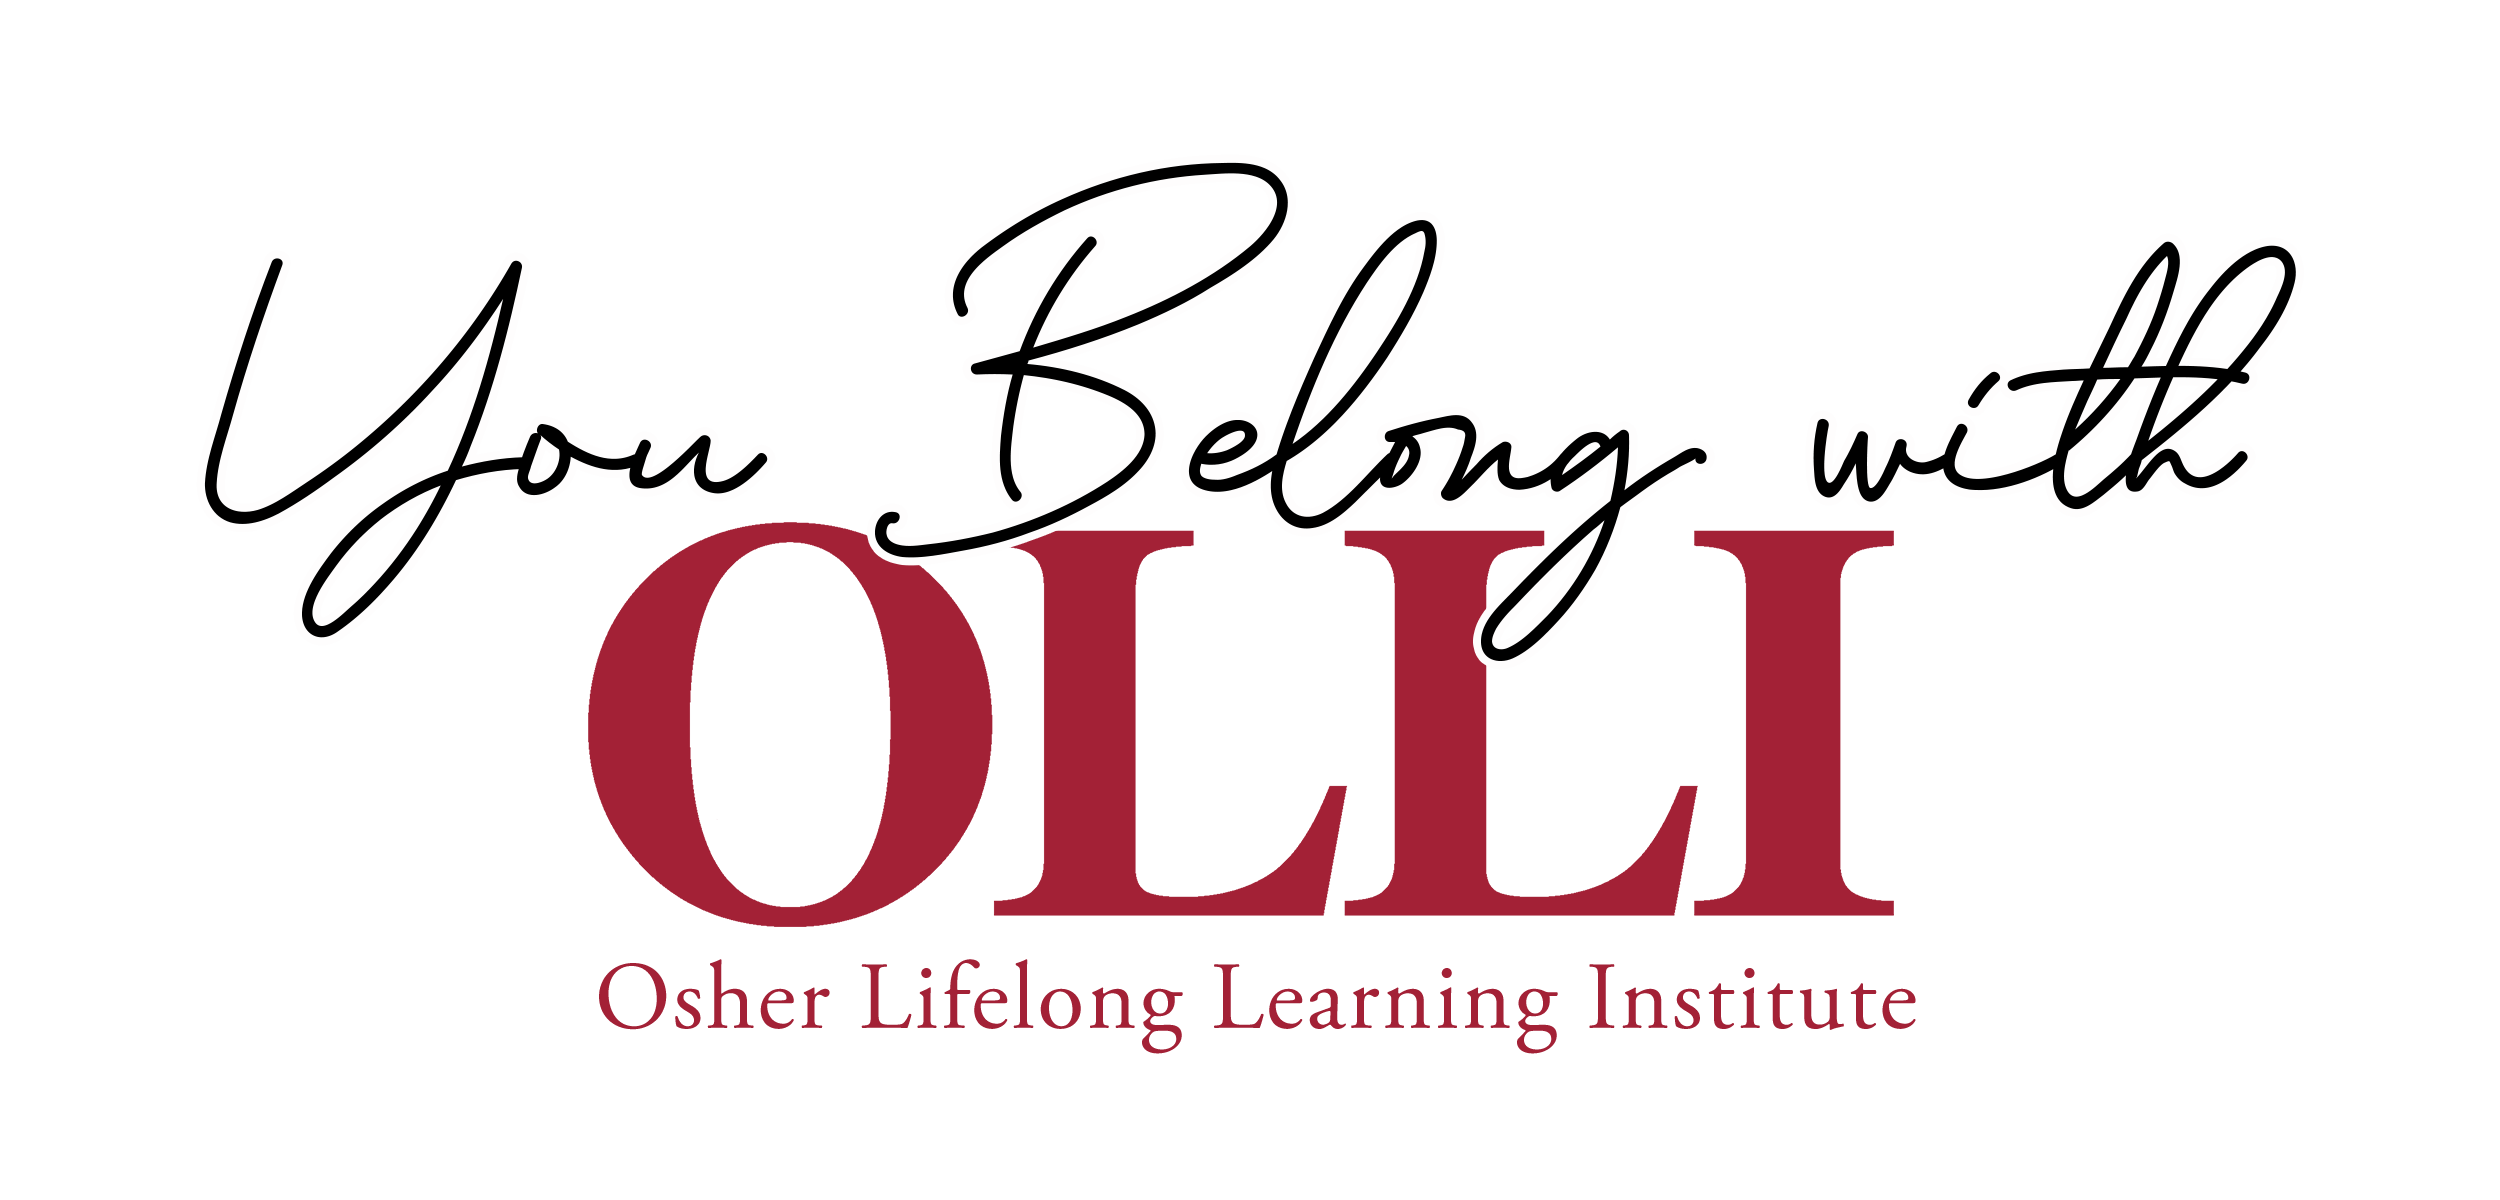 You belong with OLLI Osher Lifelong Learning Institute